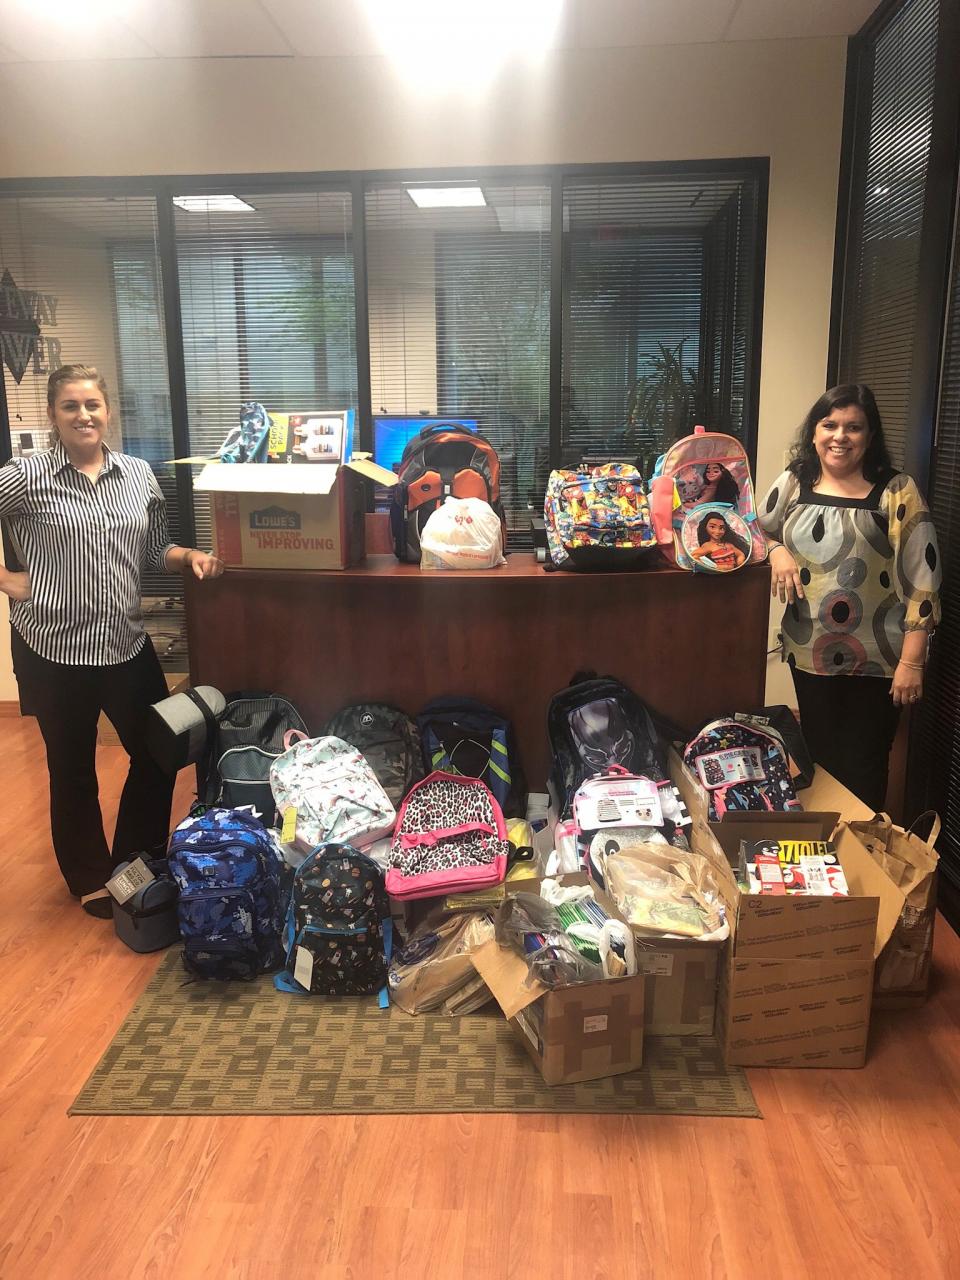 Dallas Office Collecting Backpacks to Donate